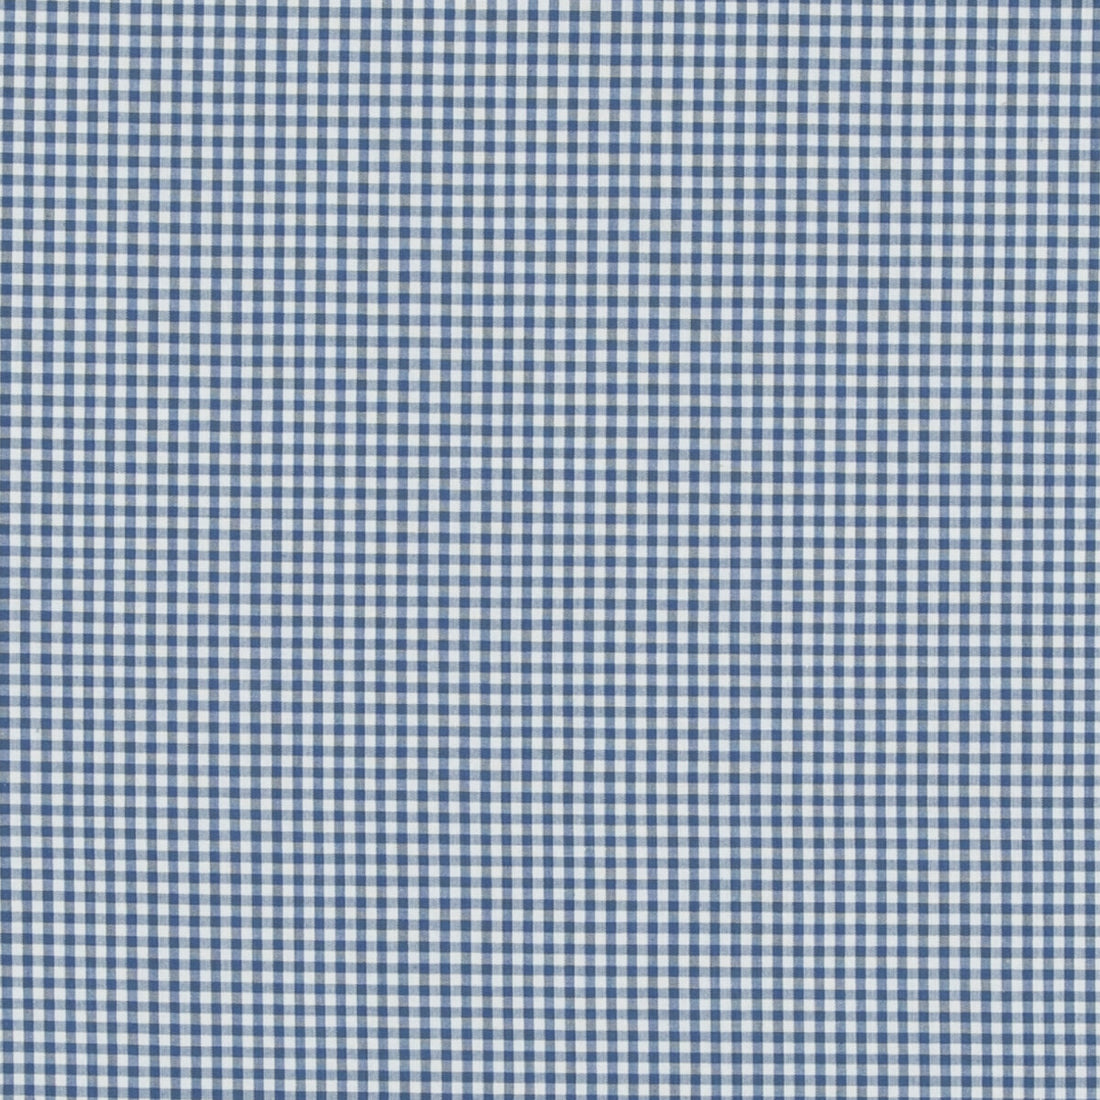 Sherborne Gingham fabric in blue color - pattern PF50506.660.0 - by Baker Lifestyle in the Bridport collection